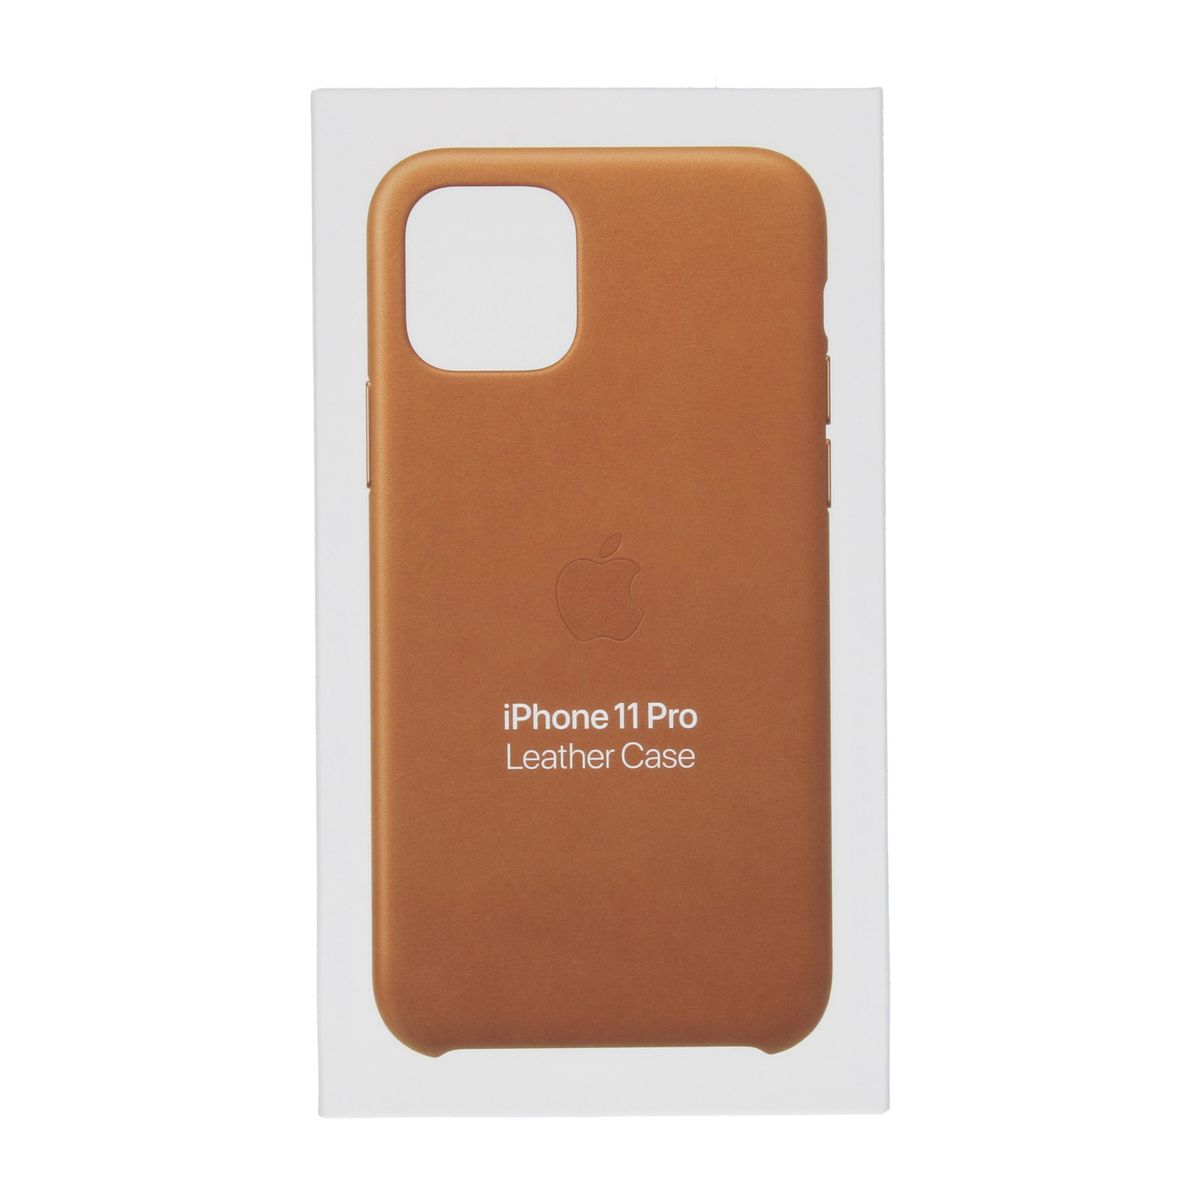 Apple Leather Backcover for iPhone 11 Pro  - Saddle Brown